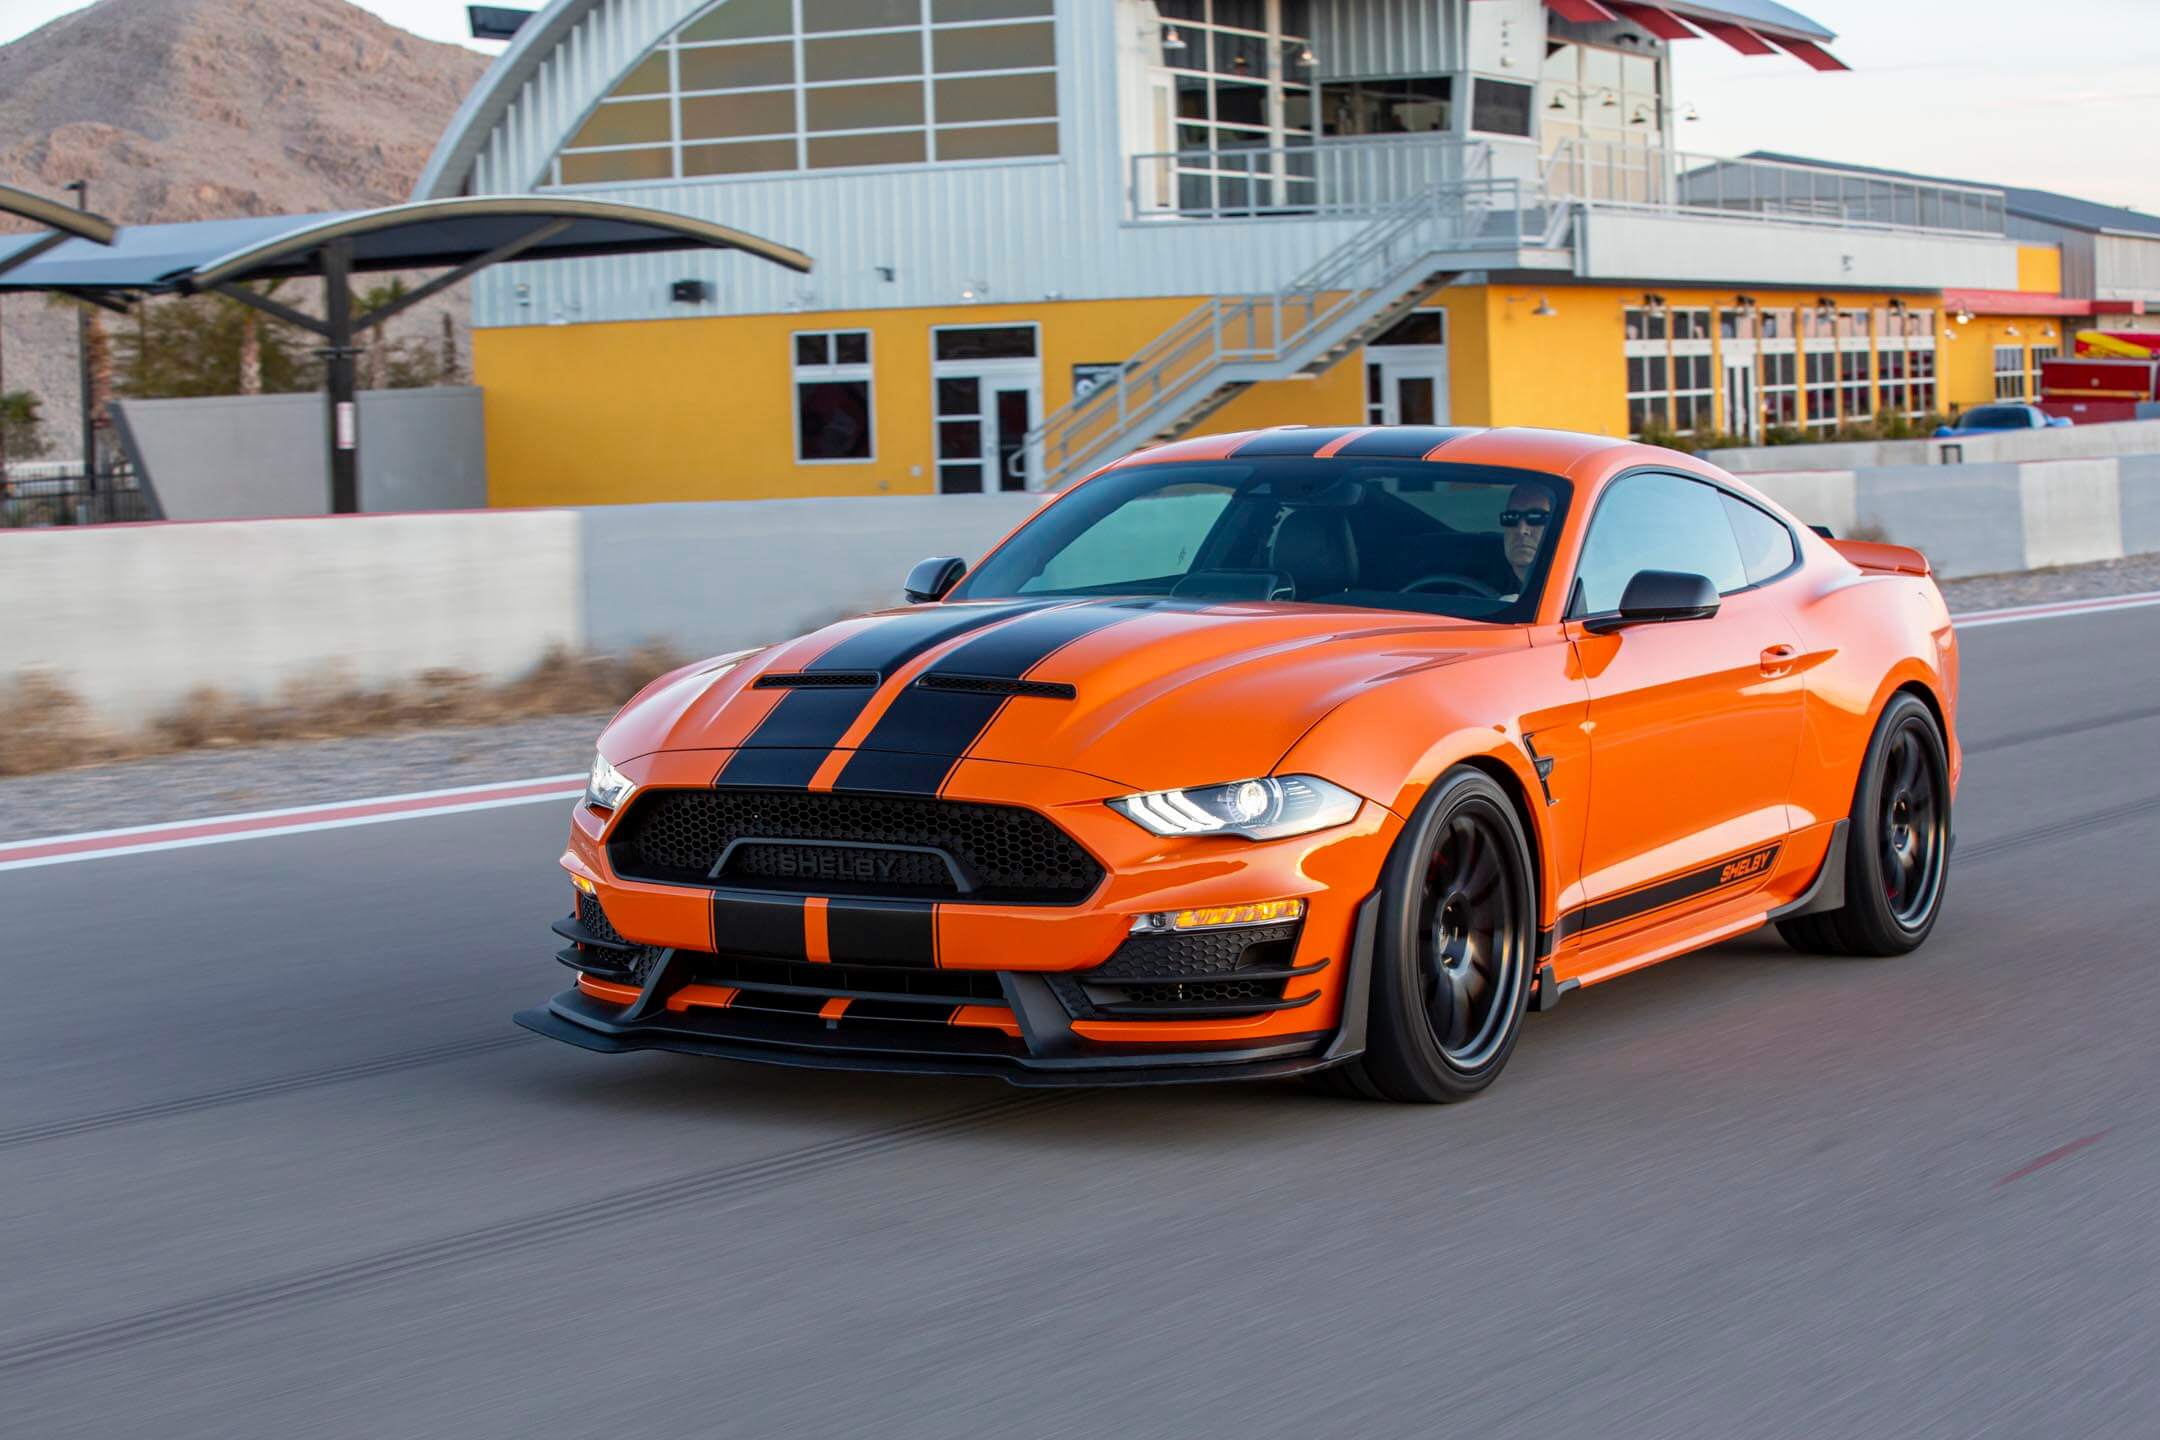 The 2020 Shelby Signature Series Ford Mustang features 825 horsepower.